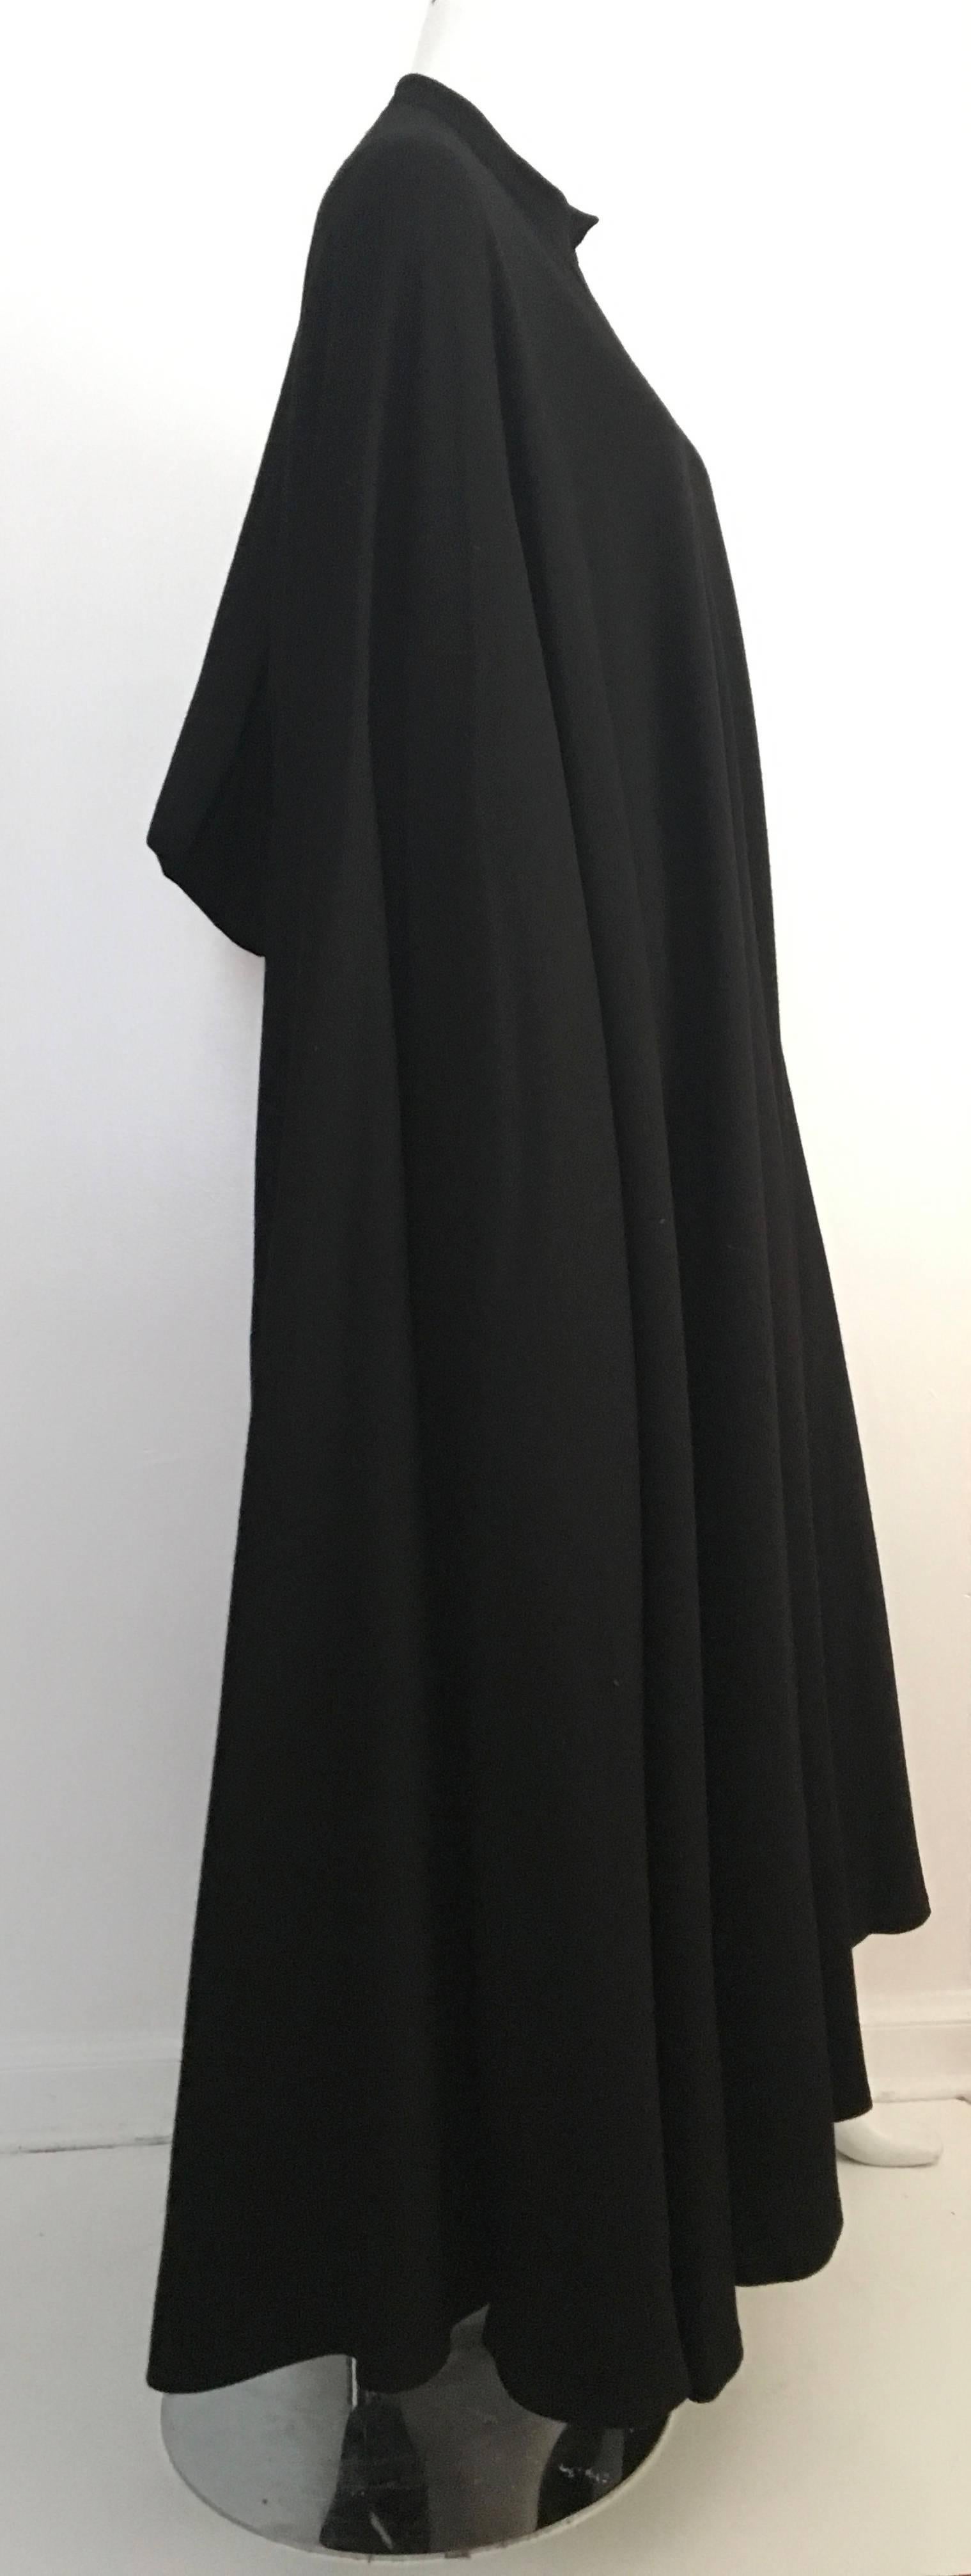 Guy Laroche 1970s black wool cape.  Capes are a MUST have for any woman's collection and what better cape than a vintage one? Capes never go out of style because the design is timeless. This is from the collection of a woman who in the 80s worked